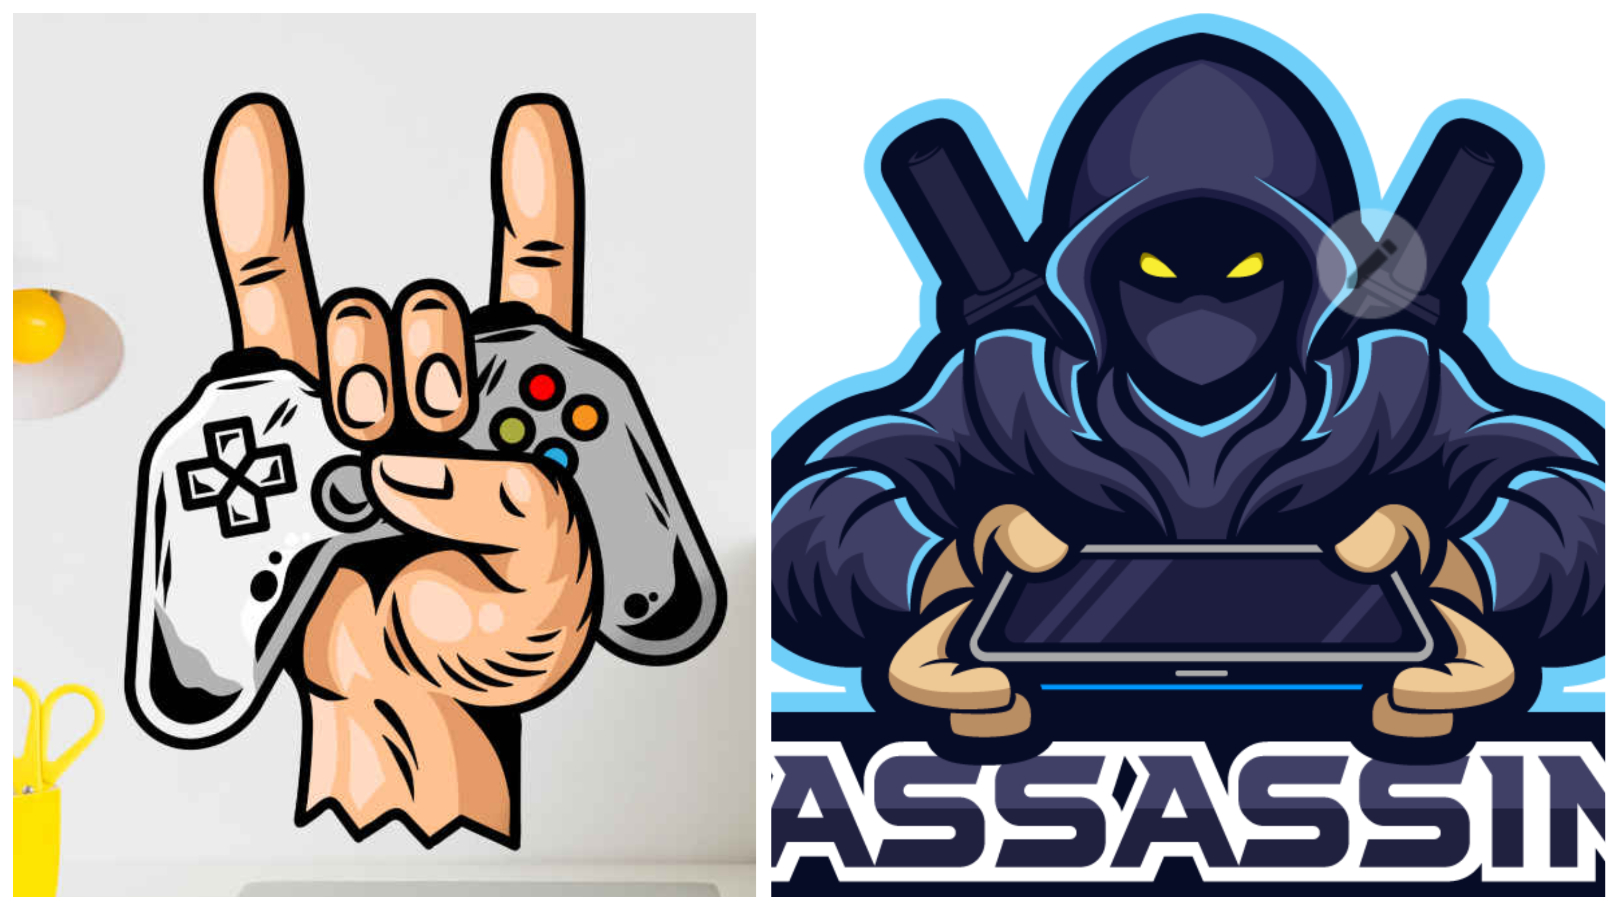 Sticker for gamers